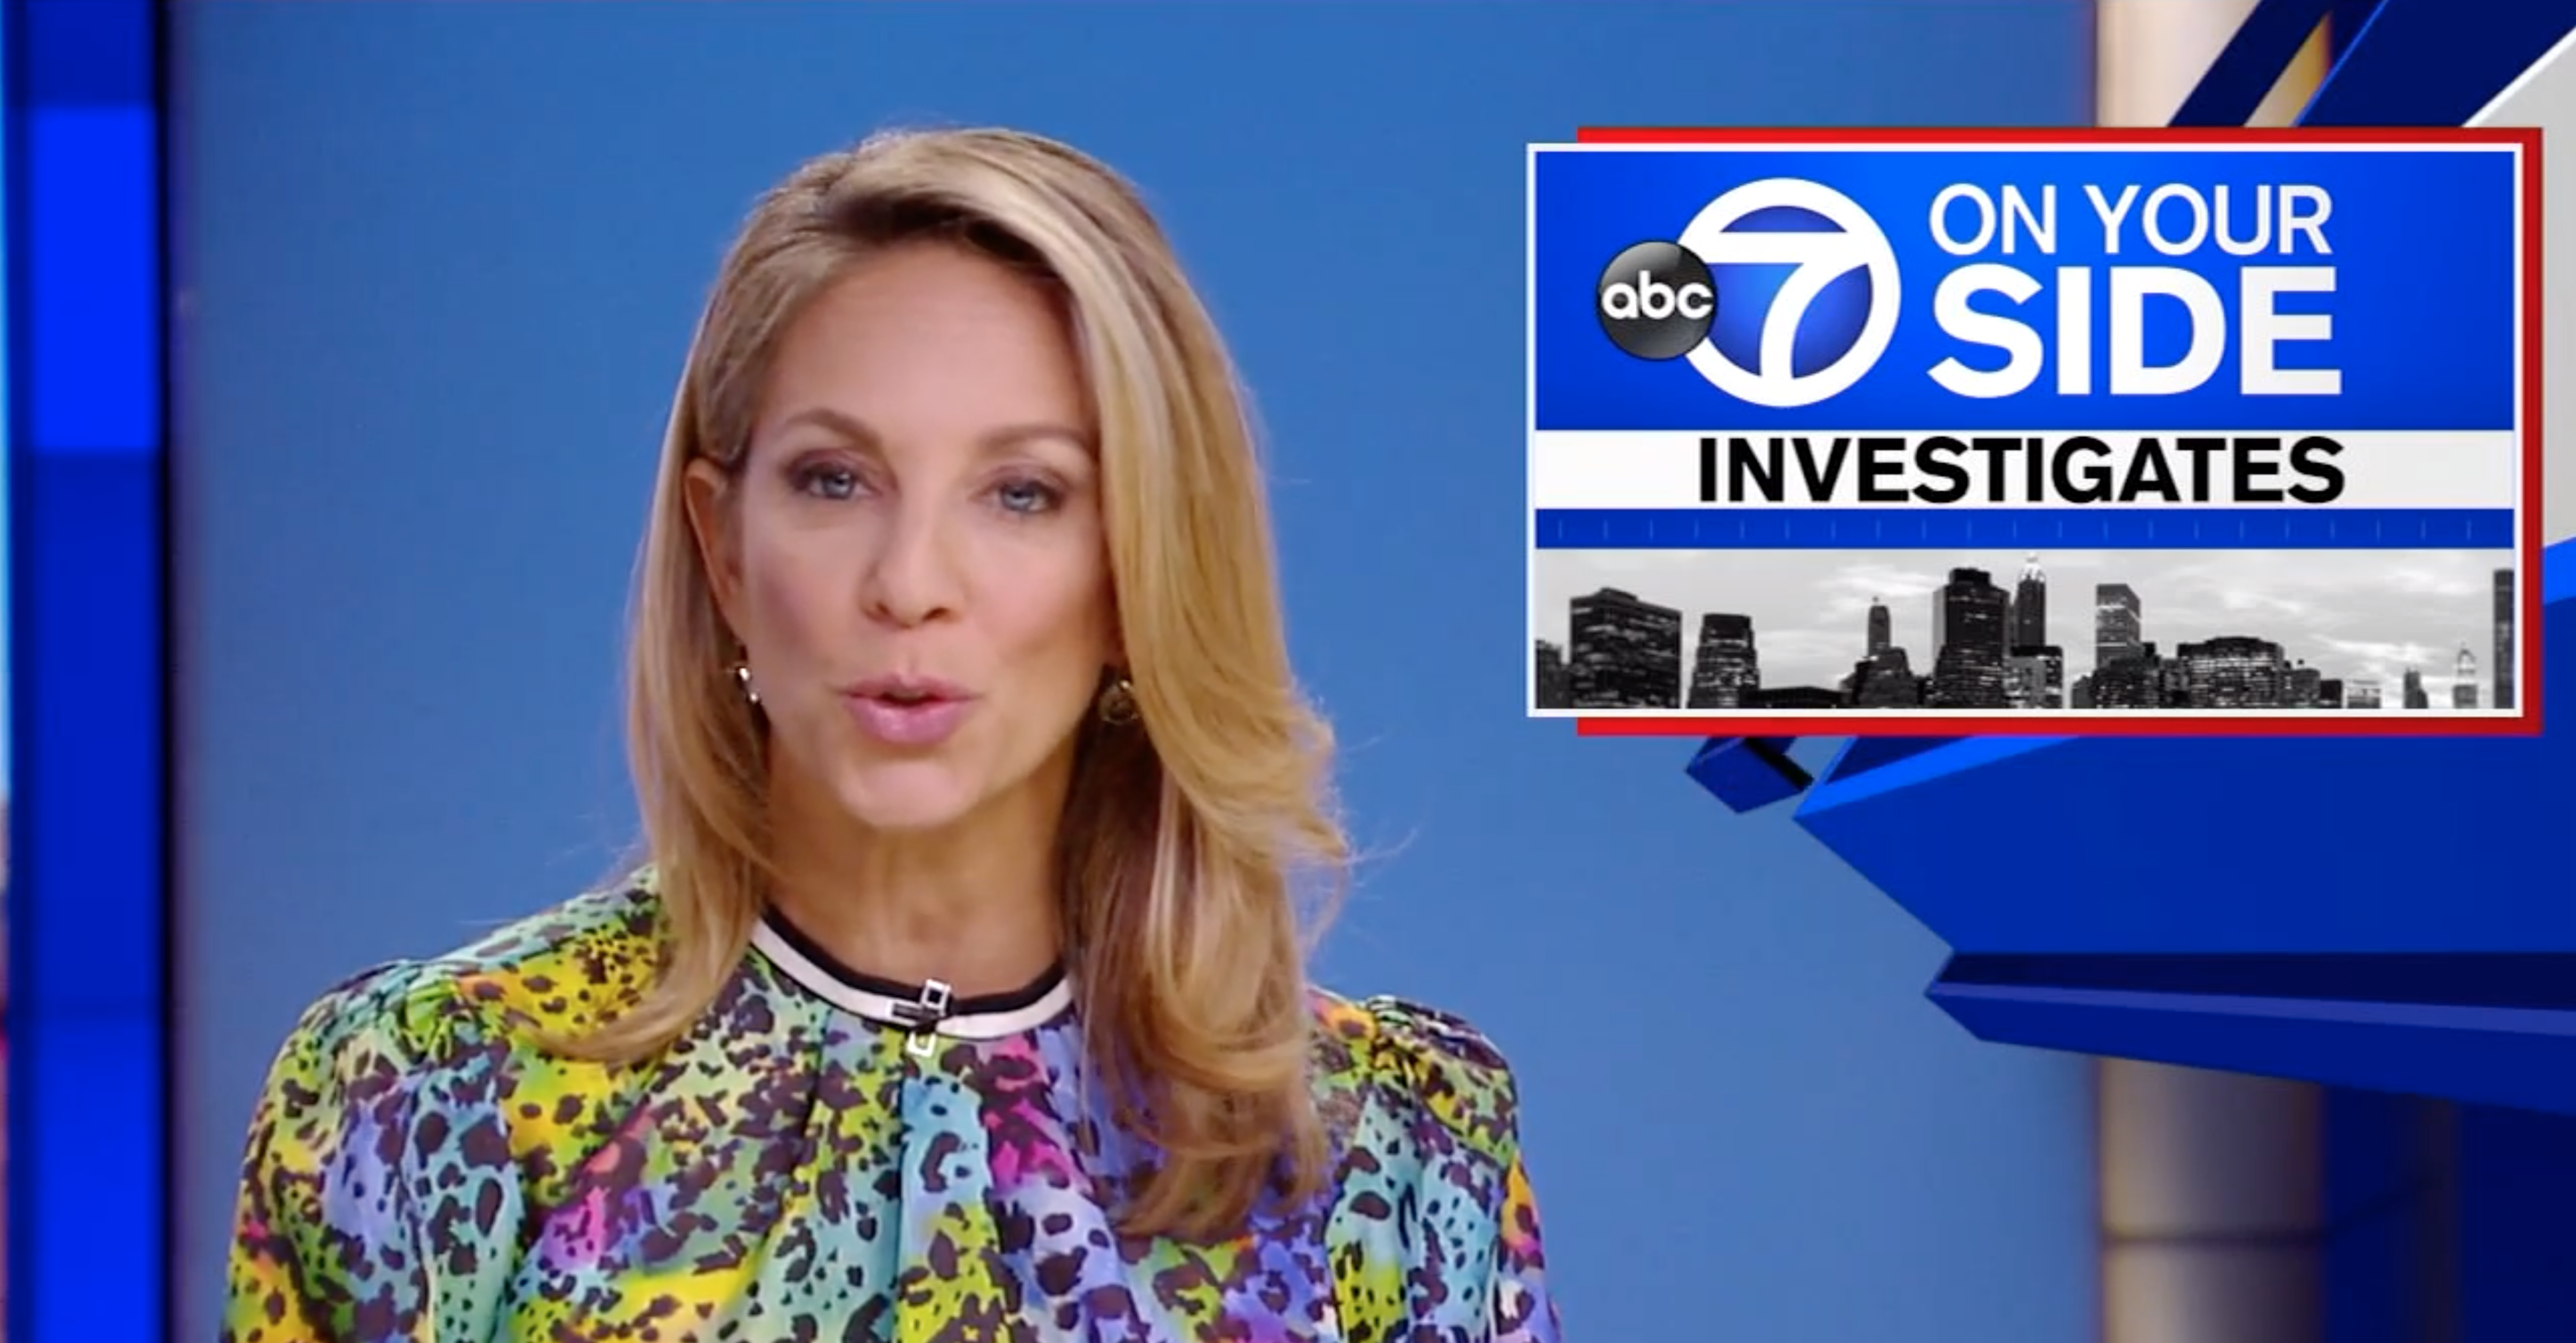 NBF - ABC 7 On Your Side Investigates